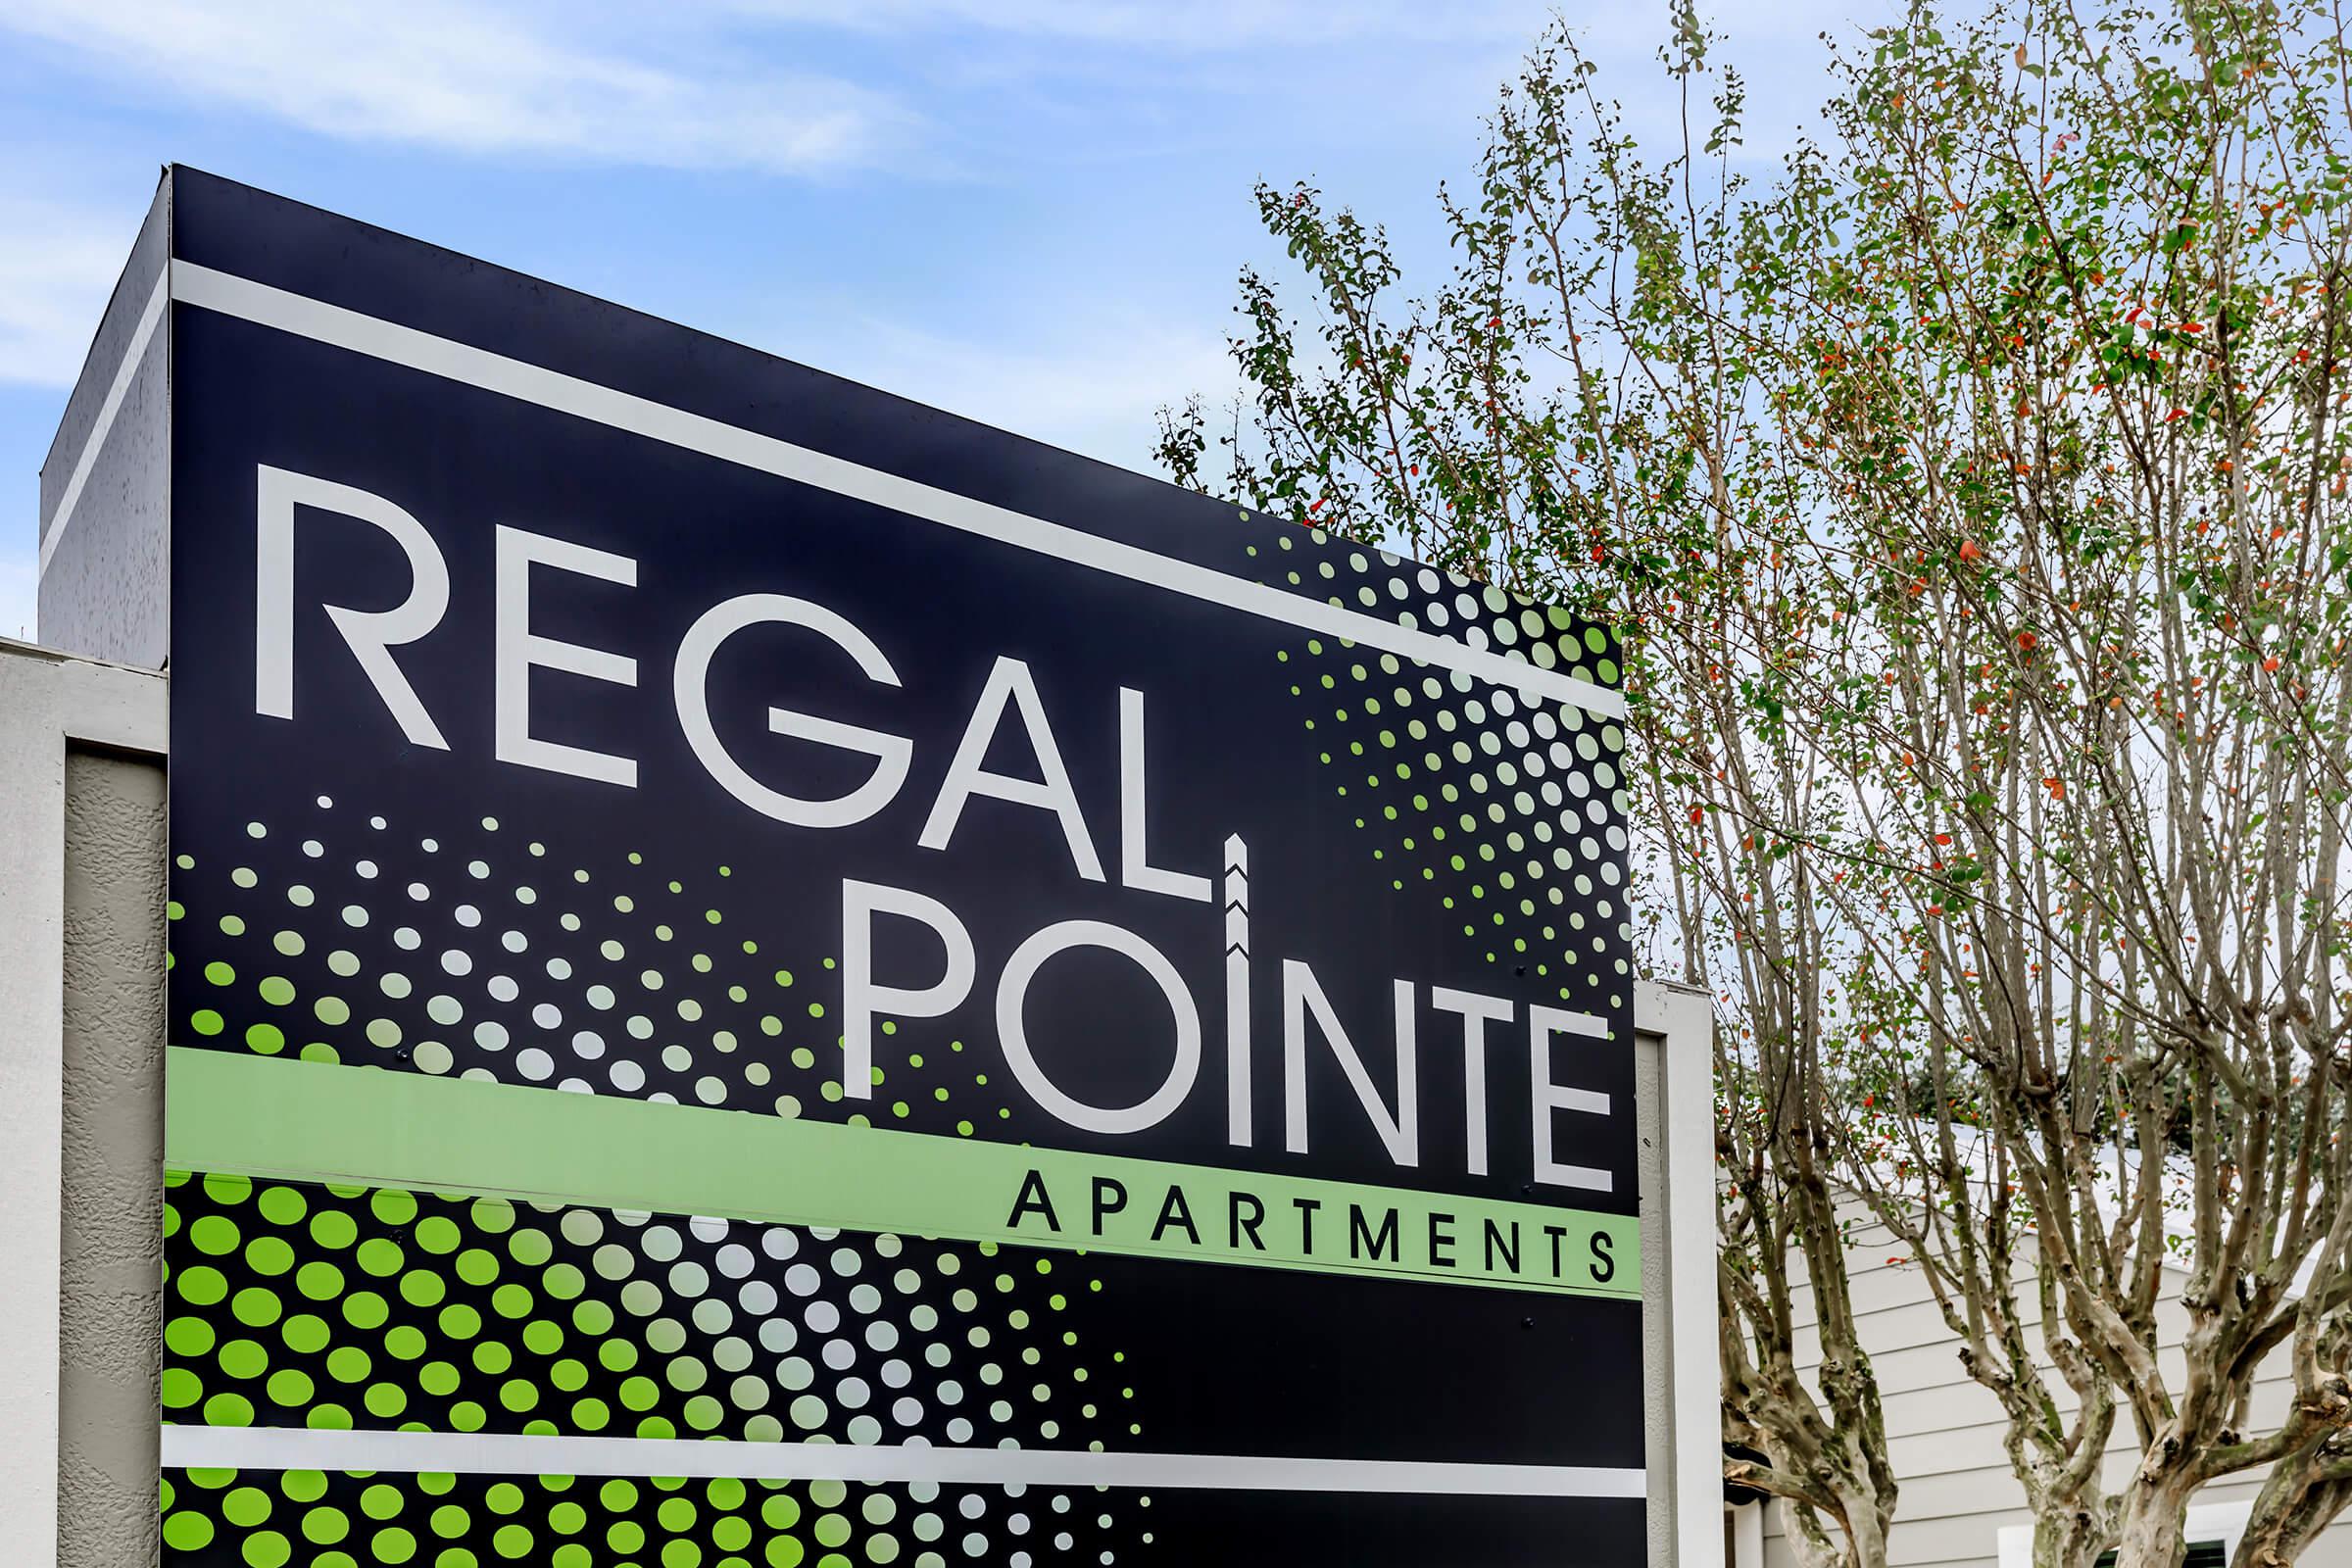 WELCOME HOME TO REGAL POINTE APARTMENTS IN HOUSTON, TX